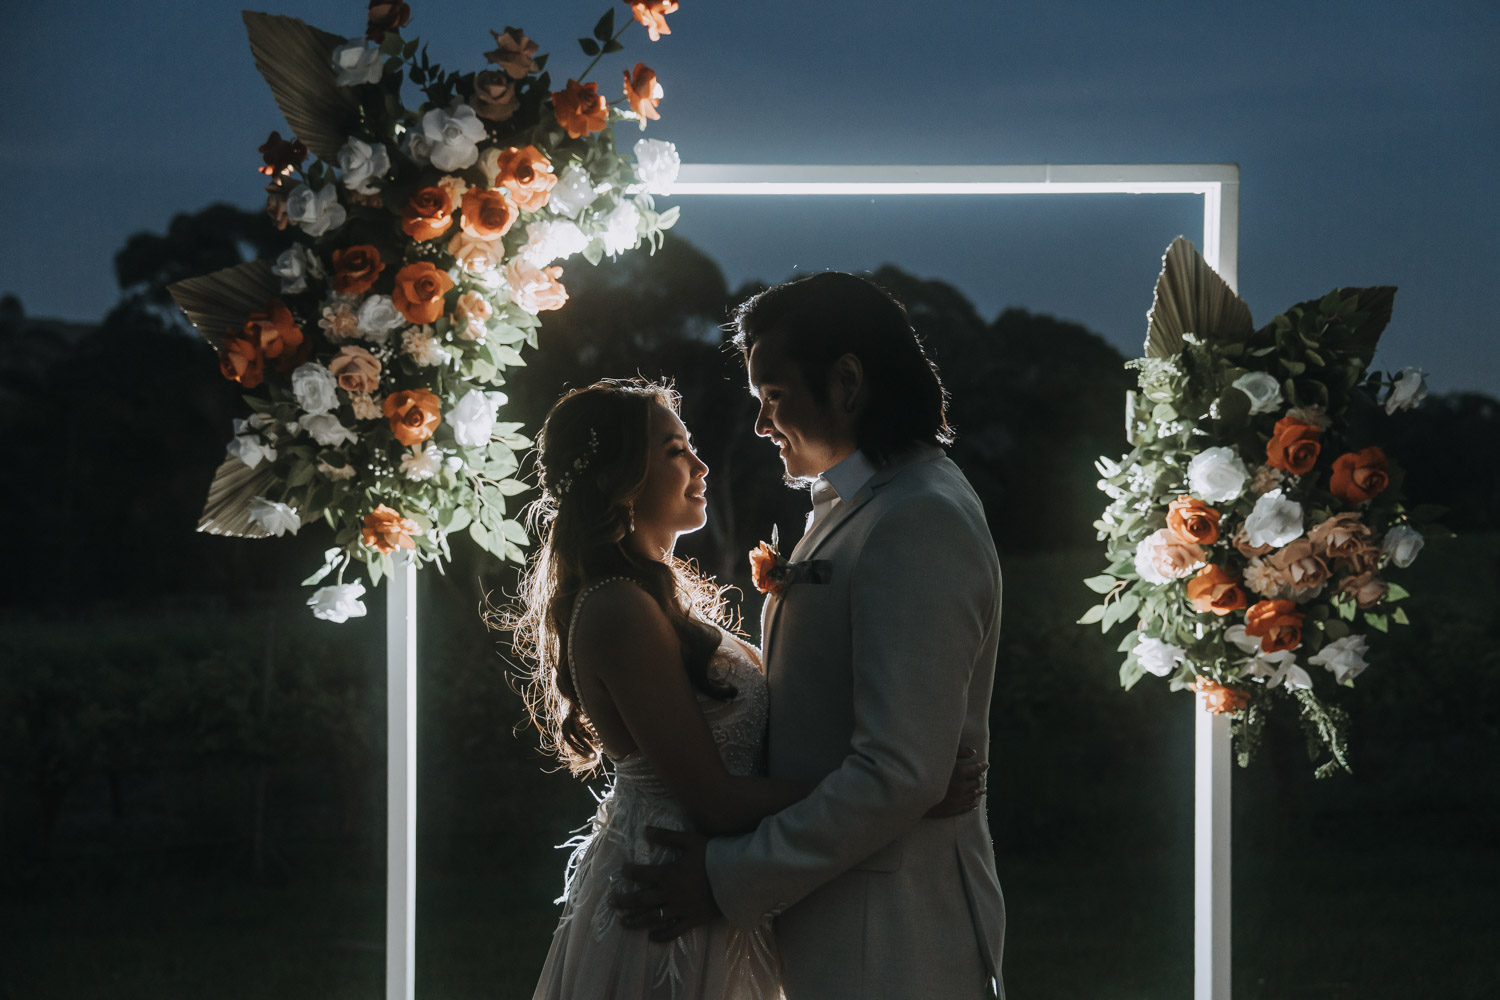 Bride and groom share a romantic moment under a floral archway with a backdrop of soft evening light, capturing the intimate ambiance of their wedding day by LaterStory. Melbourne wedding photography